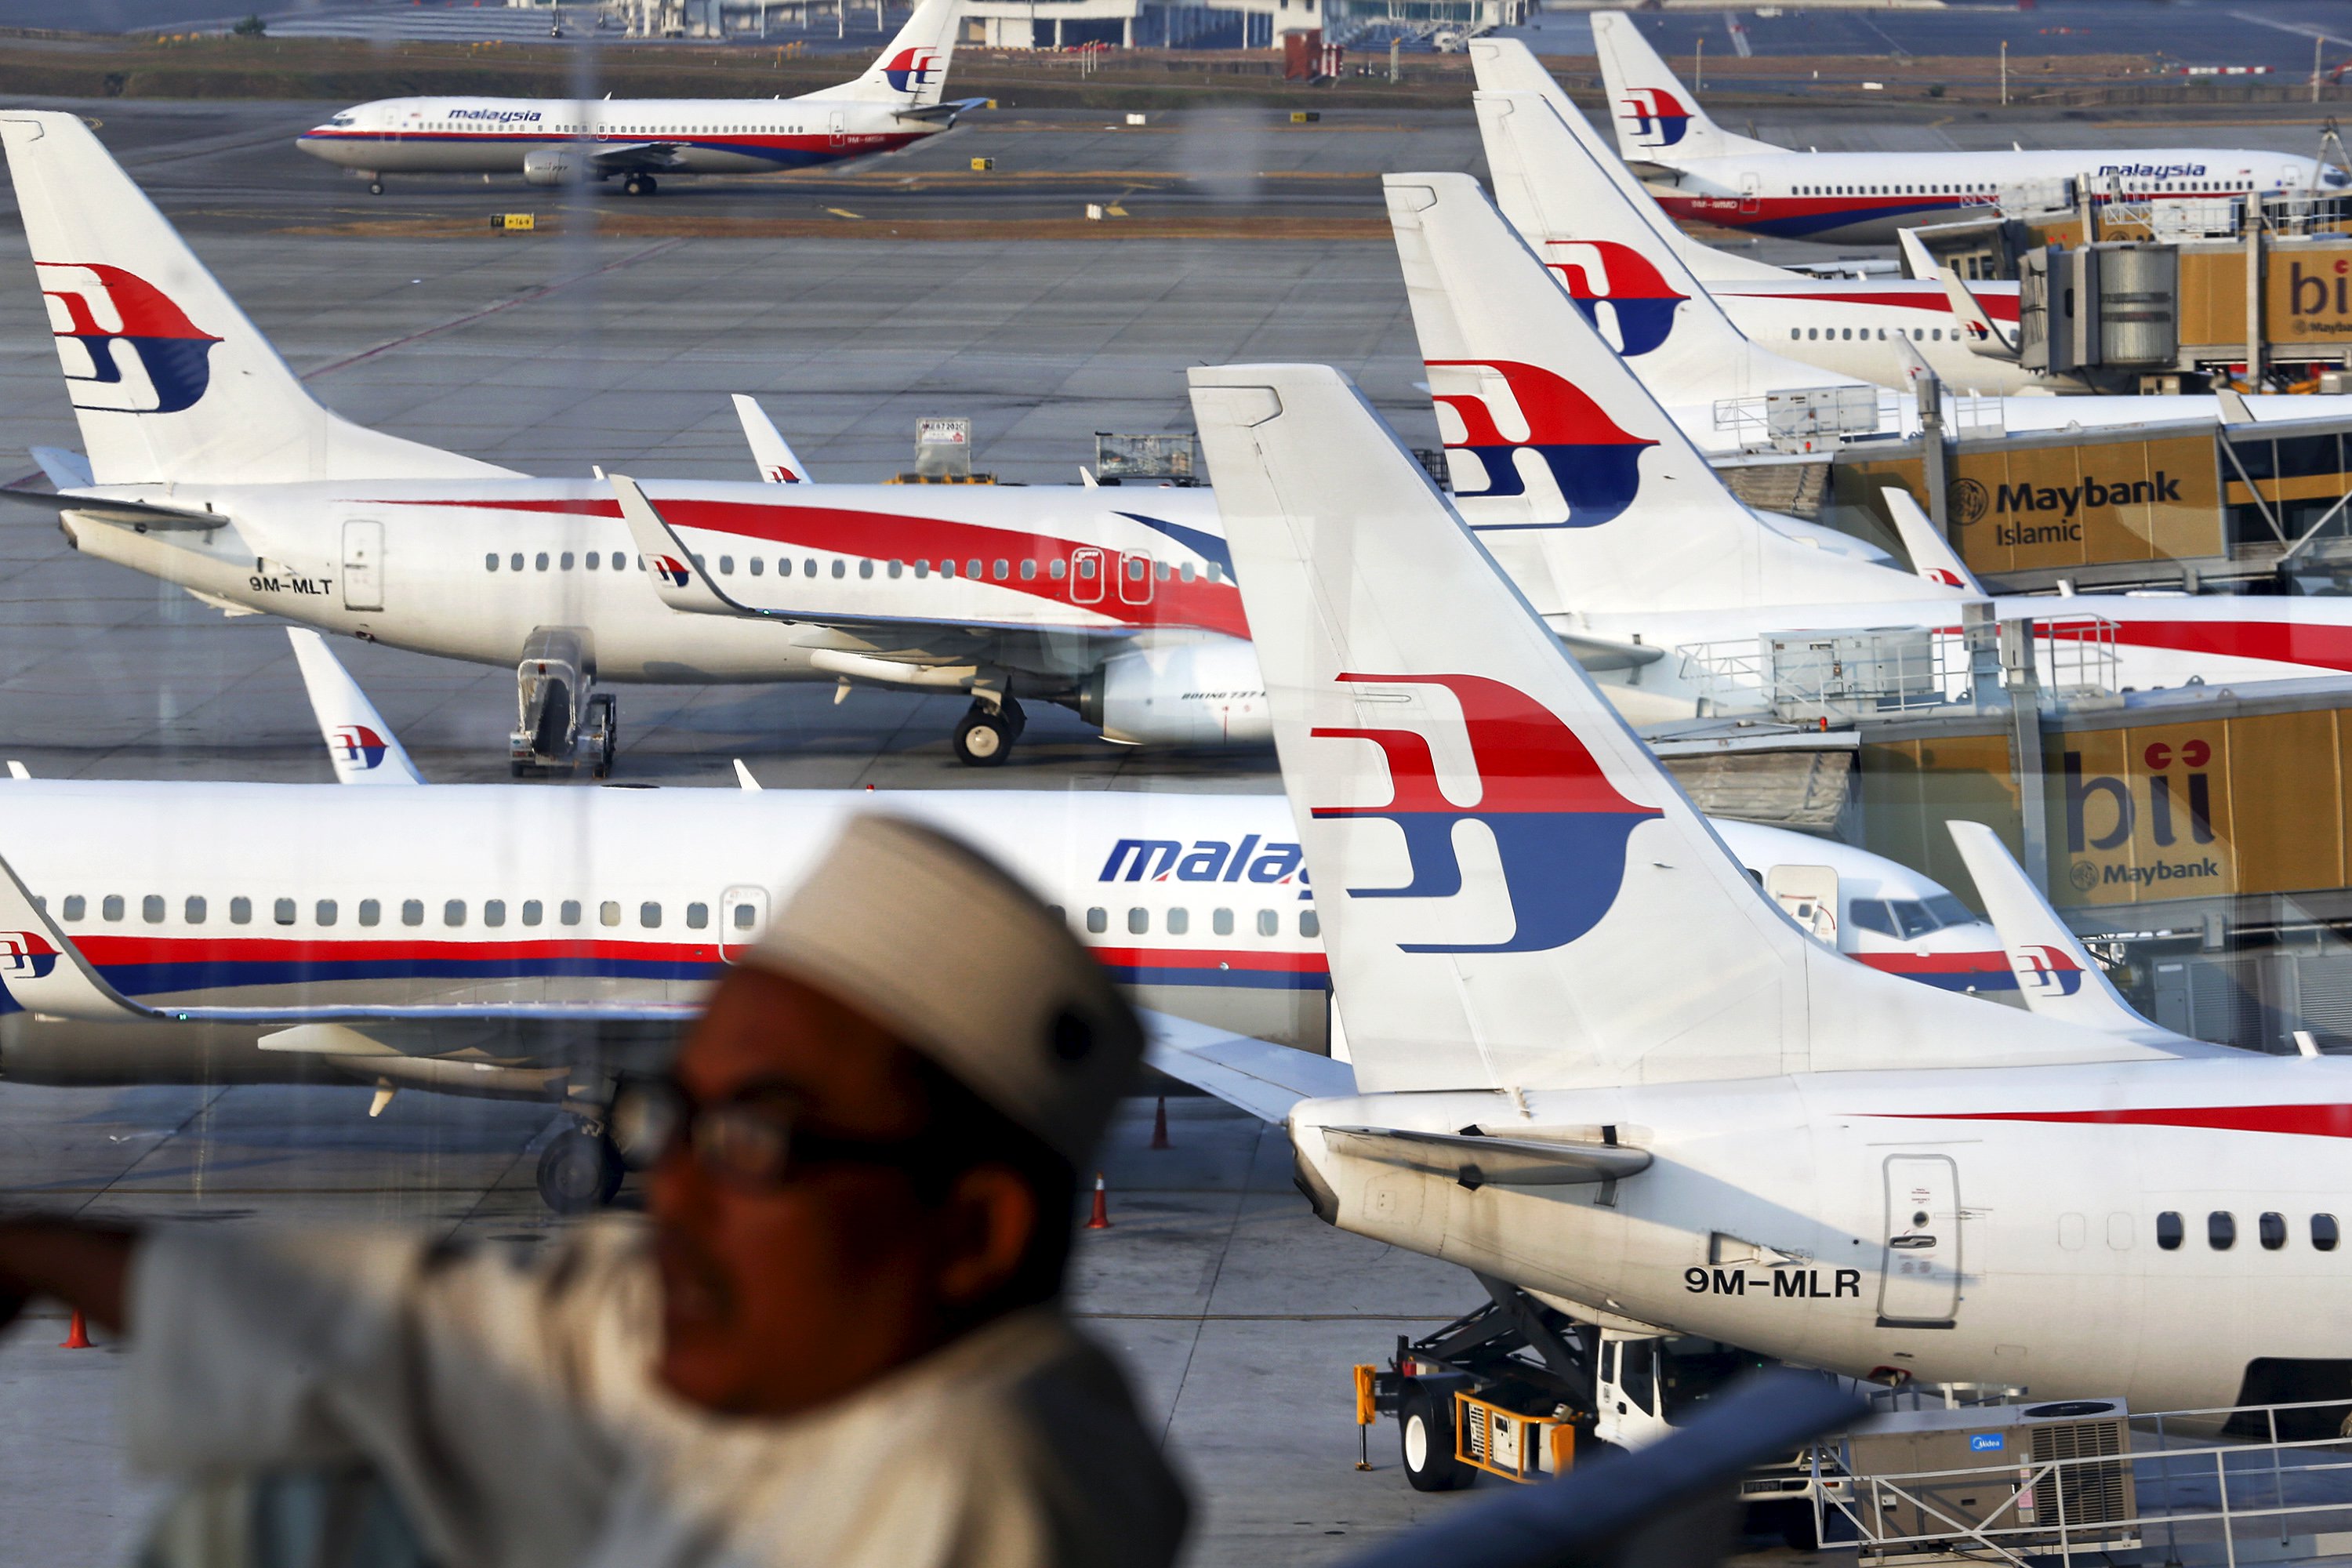 Malaysia Airlines makes emergency landing in Melbourne